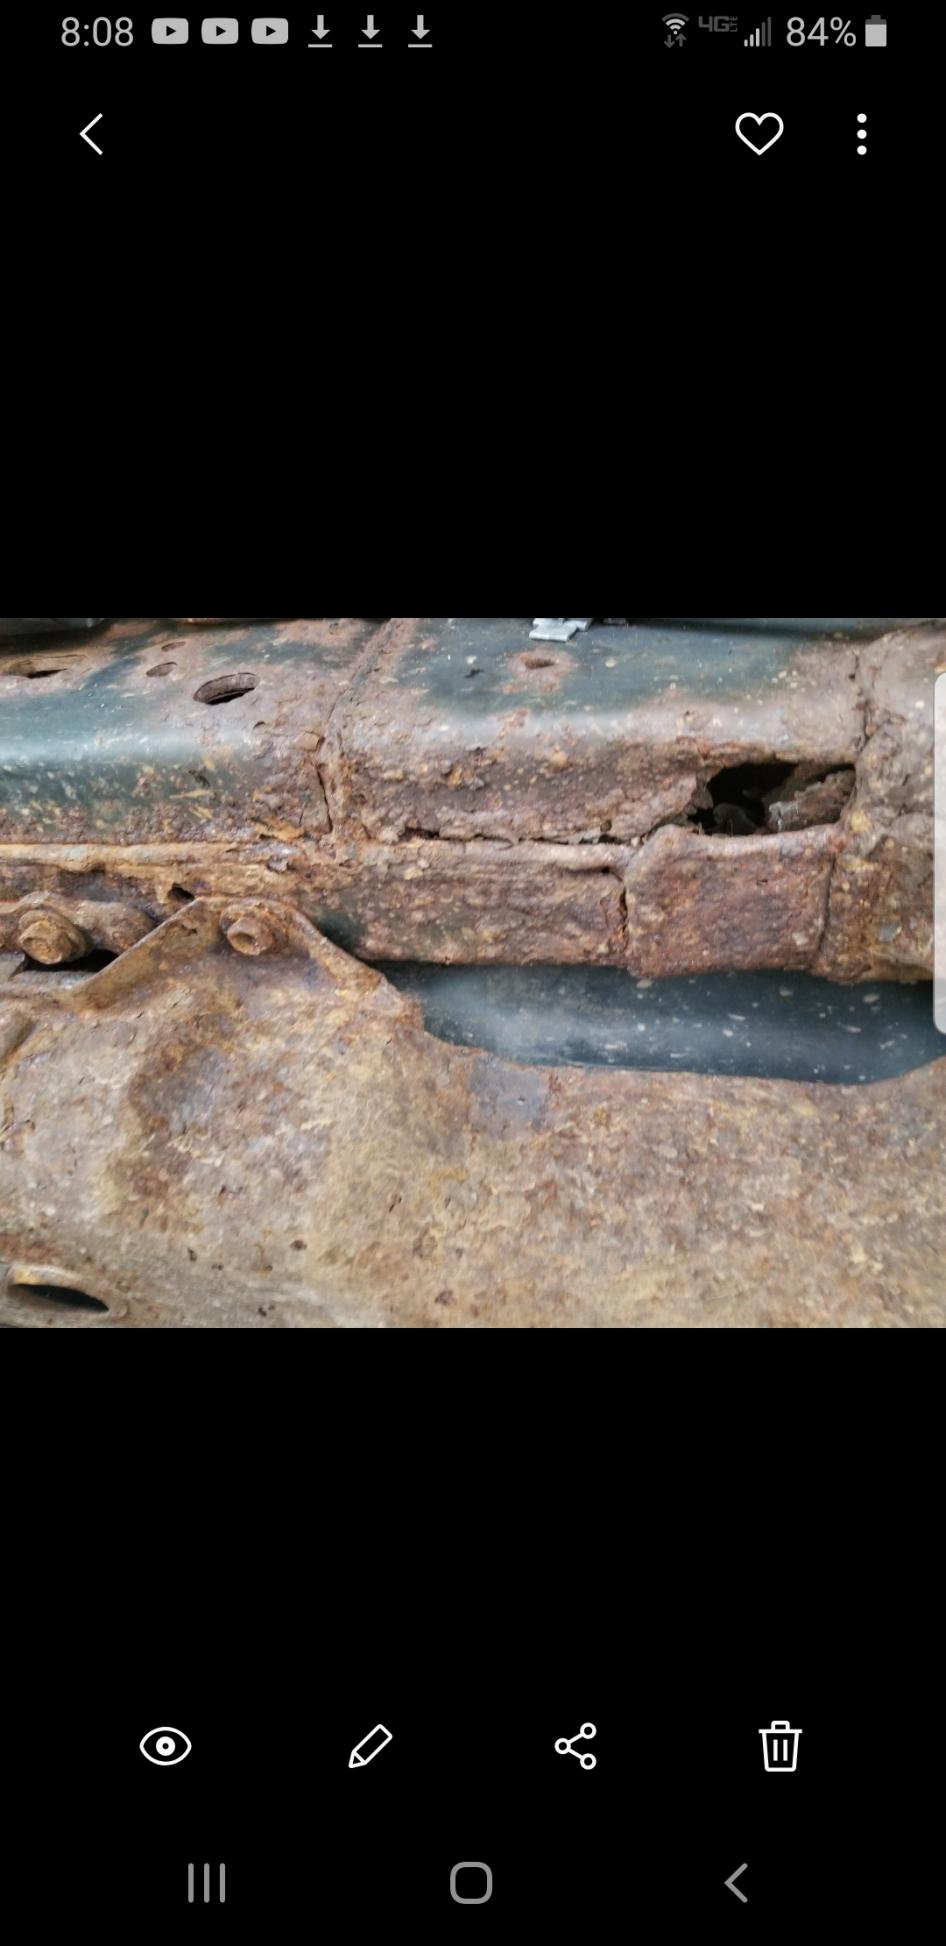 What can I do about this RUST?-screenshot_20200914-080844_gallery-jpg